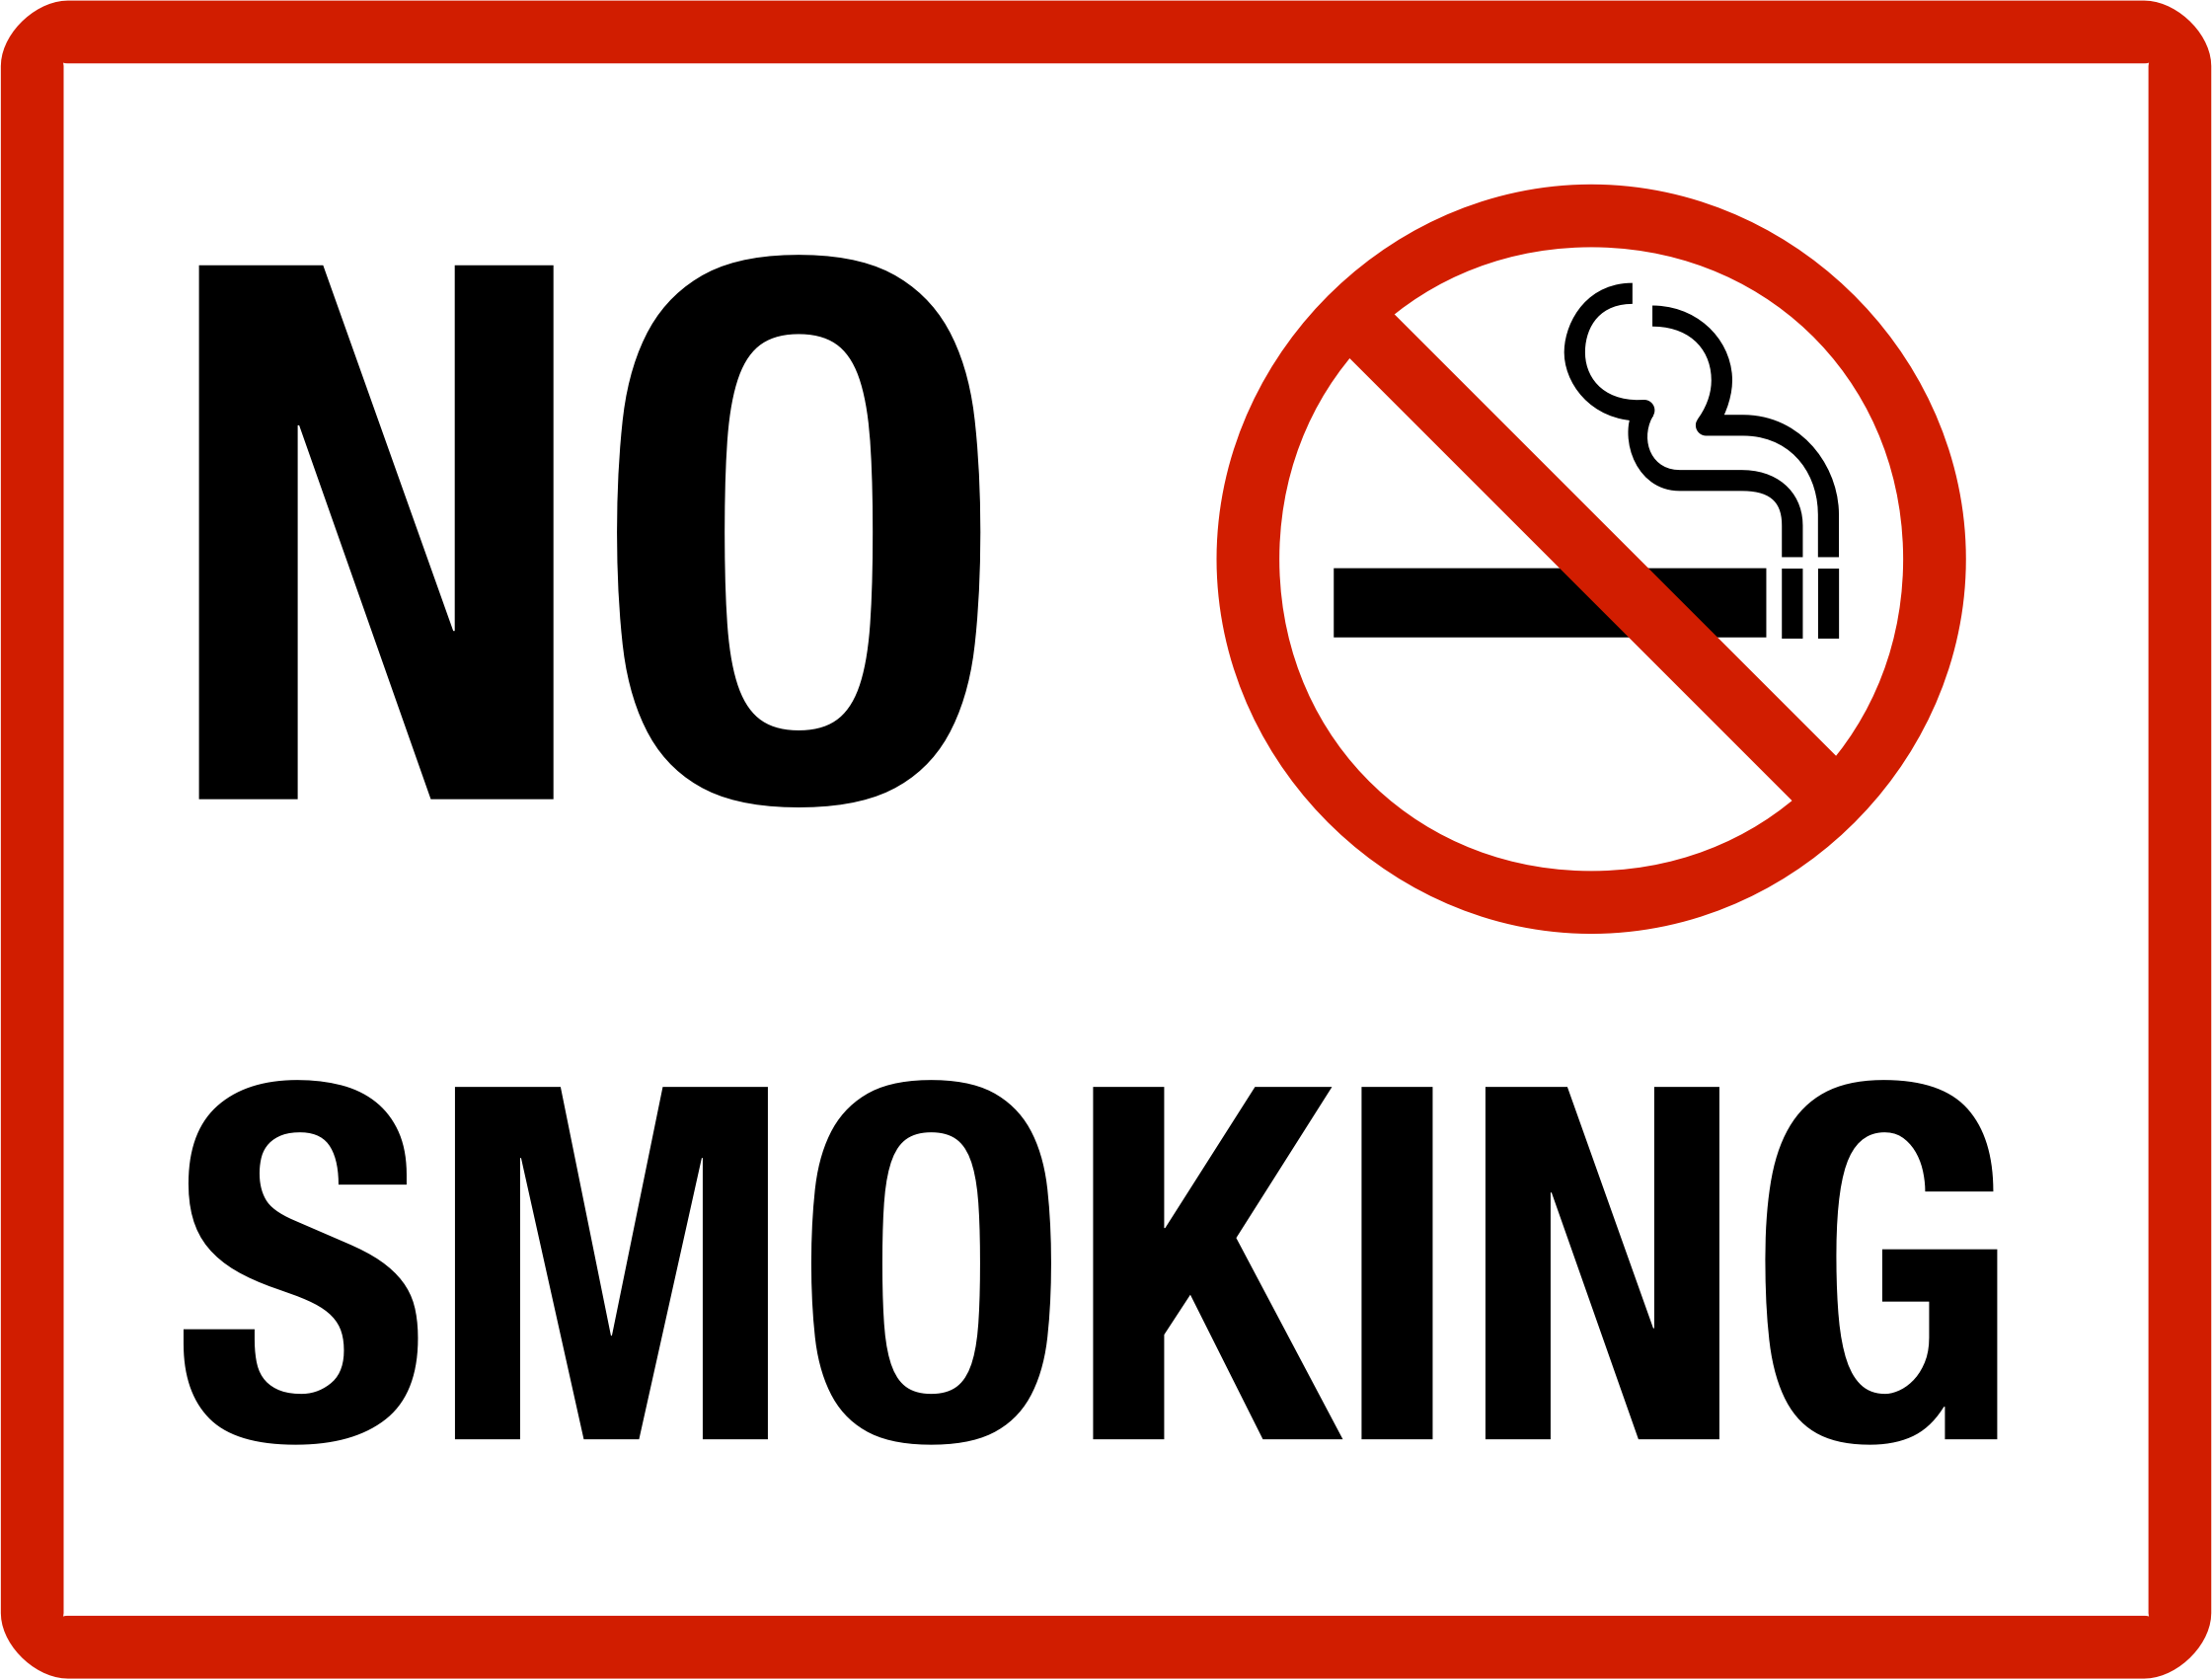 No Smoking Icon And Text - 6643 - TransparentPNG